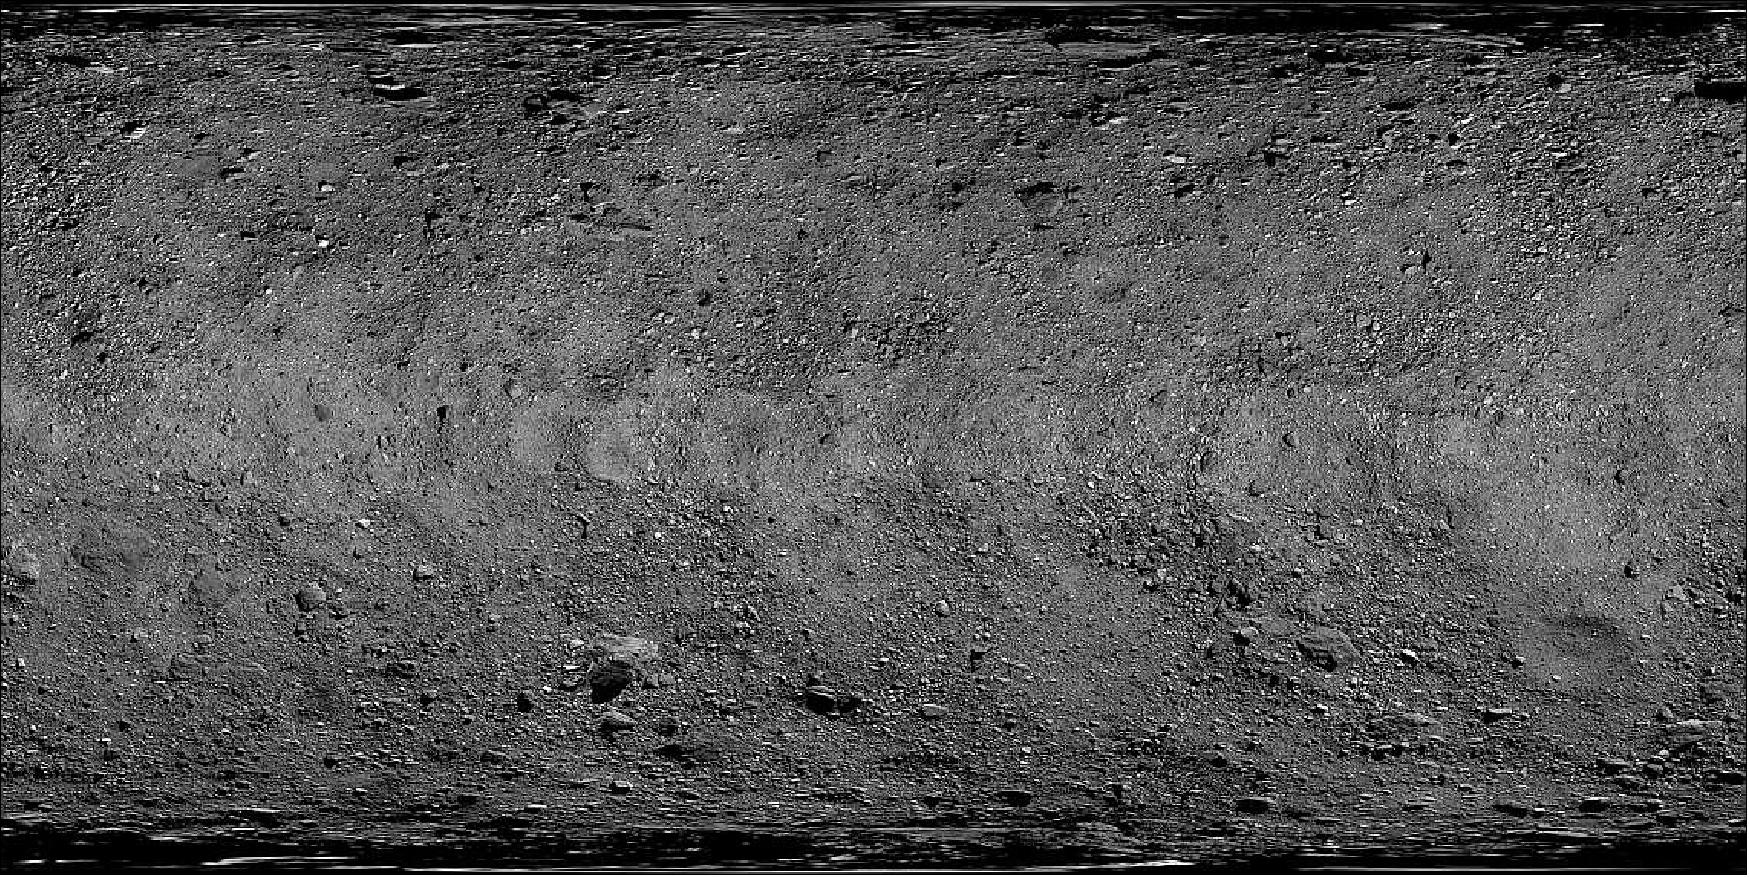 Figure 32: This global map of asteroid Bennu’s surface was created by stitching and correcting 2,155 PolyCam images. At 2 inches (5 cm) per pixel, this is the highest resolution at which a planetary body has been globally mapped (image credit: NASA/Goddard/University of Arizona)